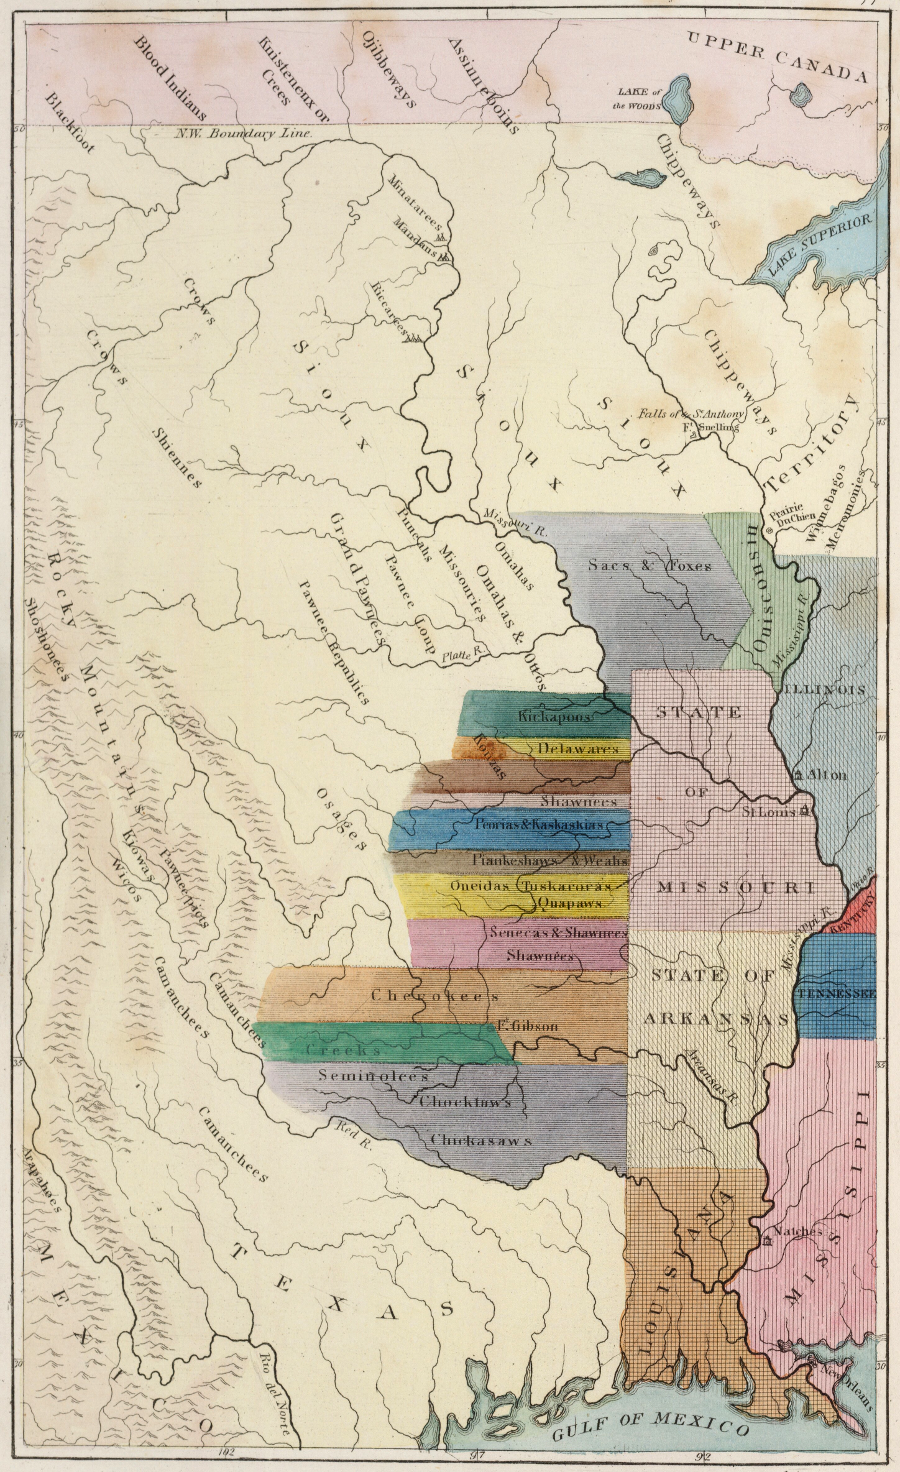 many Native American groups that once occupied lands claimed by Virginia were forced to moved west of the Mississippi River, particularly after passage of the Indian Removal Act of 1830